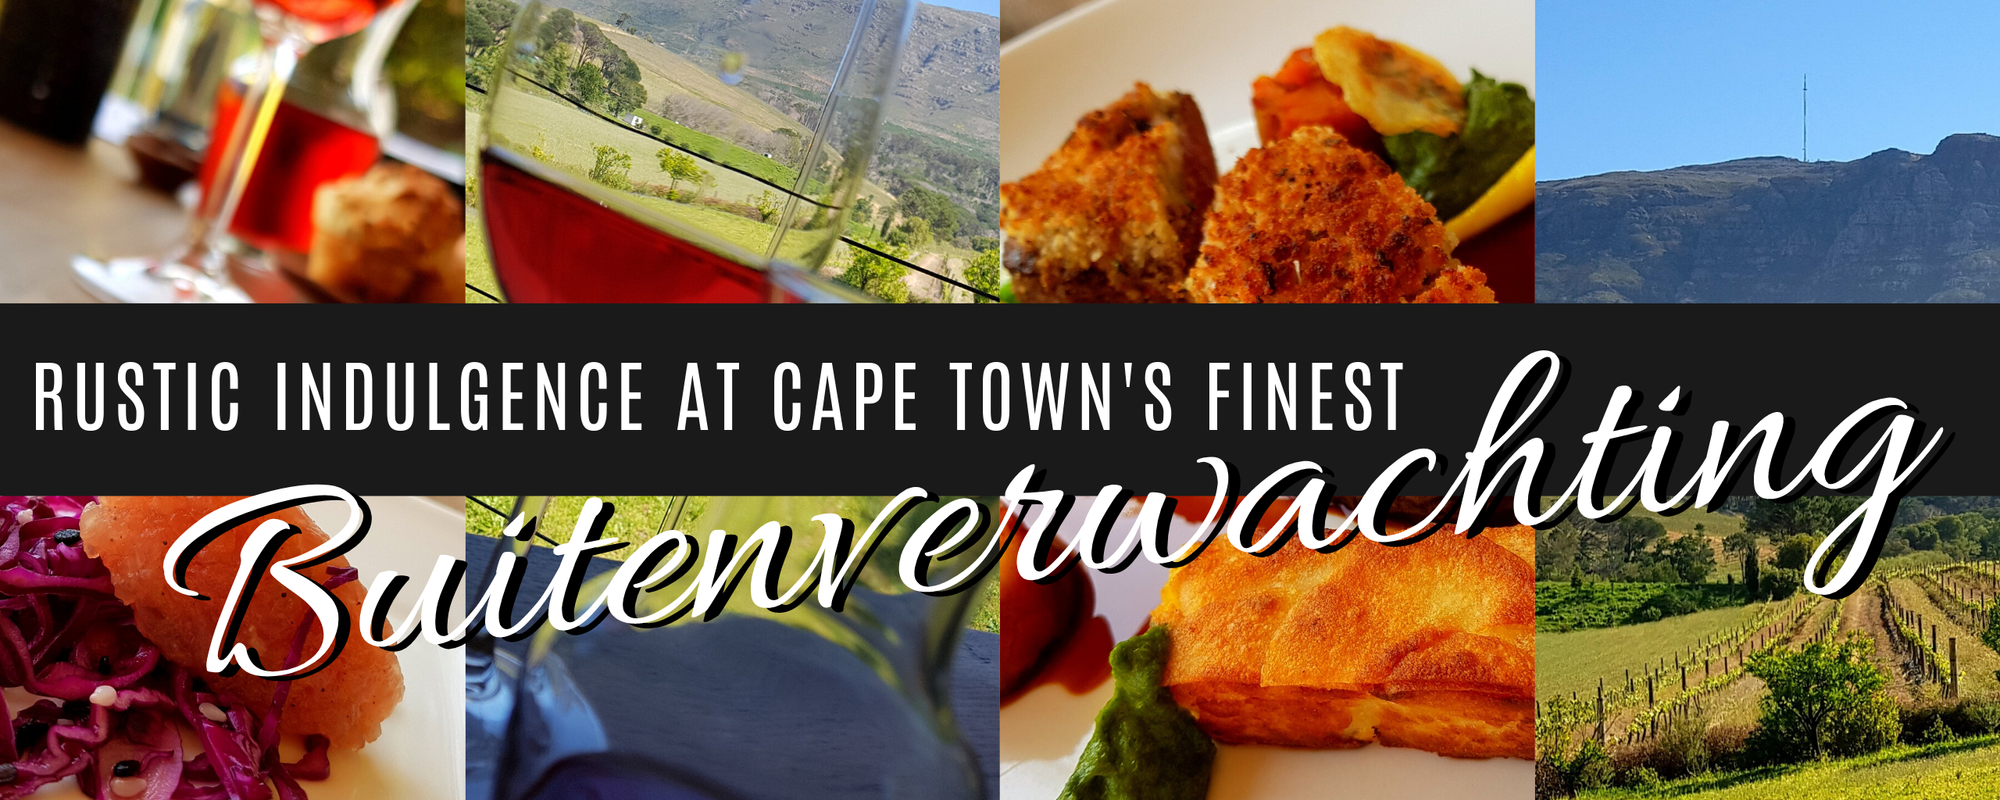 Rustic Indulgence at Cape Town's Finest - #showcase-sunday